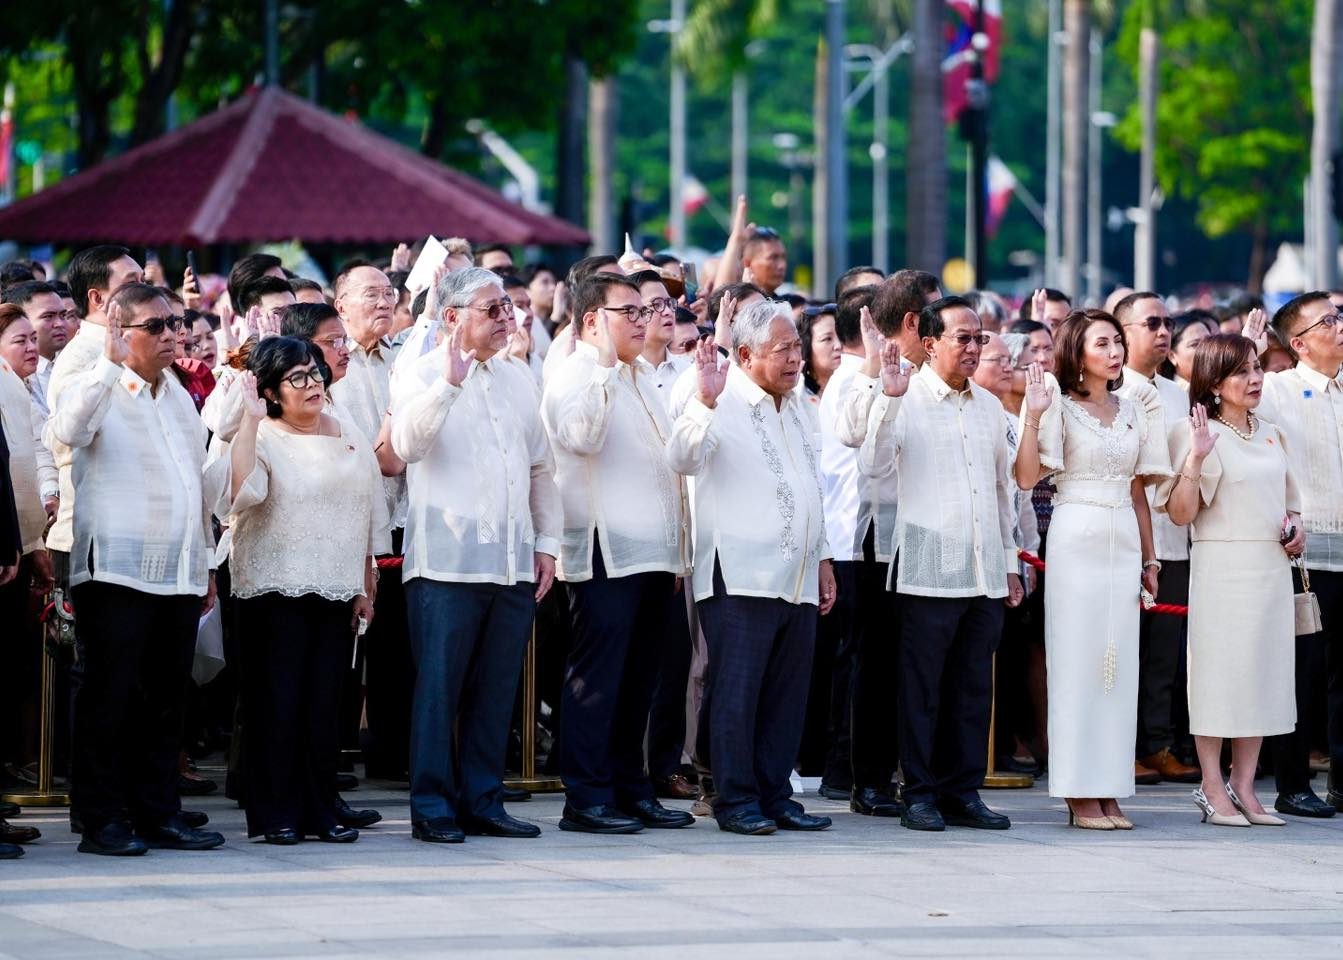 Have Marcos and his Cabinet memorized the Bagong Pilipinas hymn and pledge?